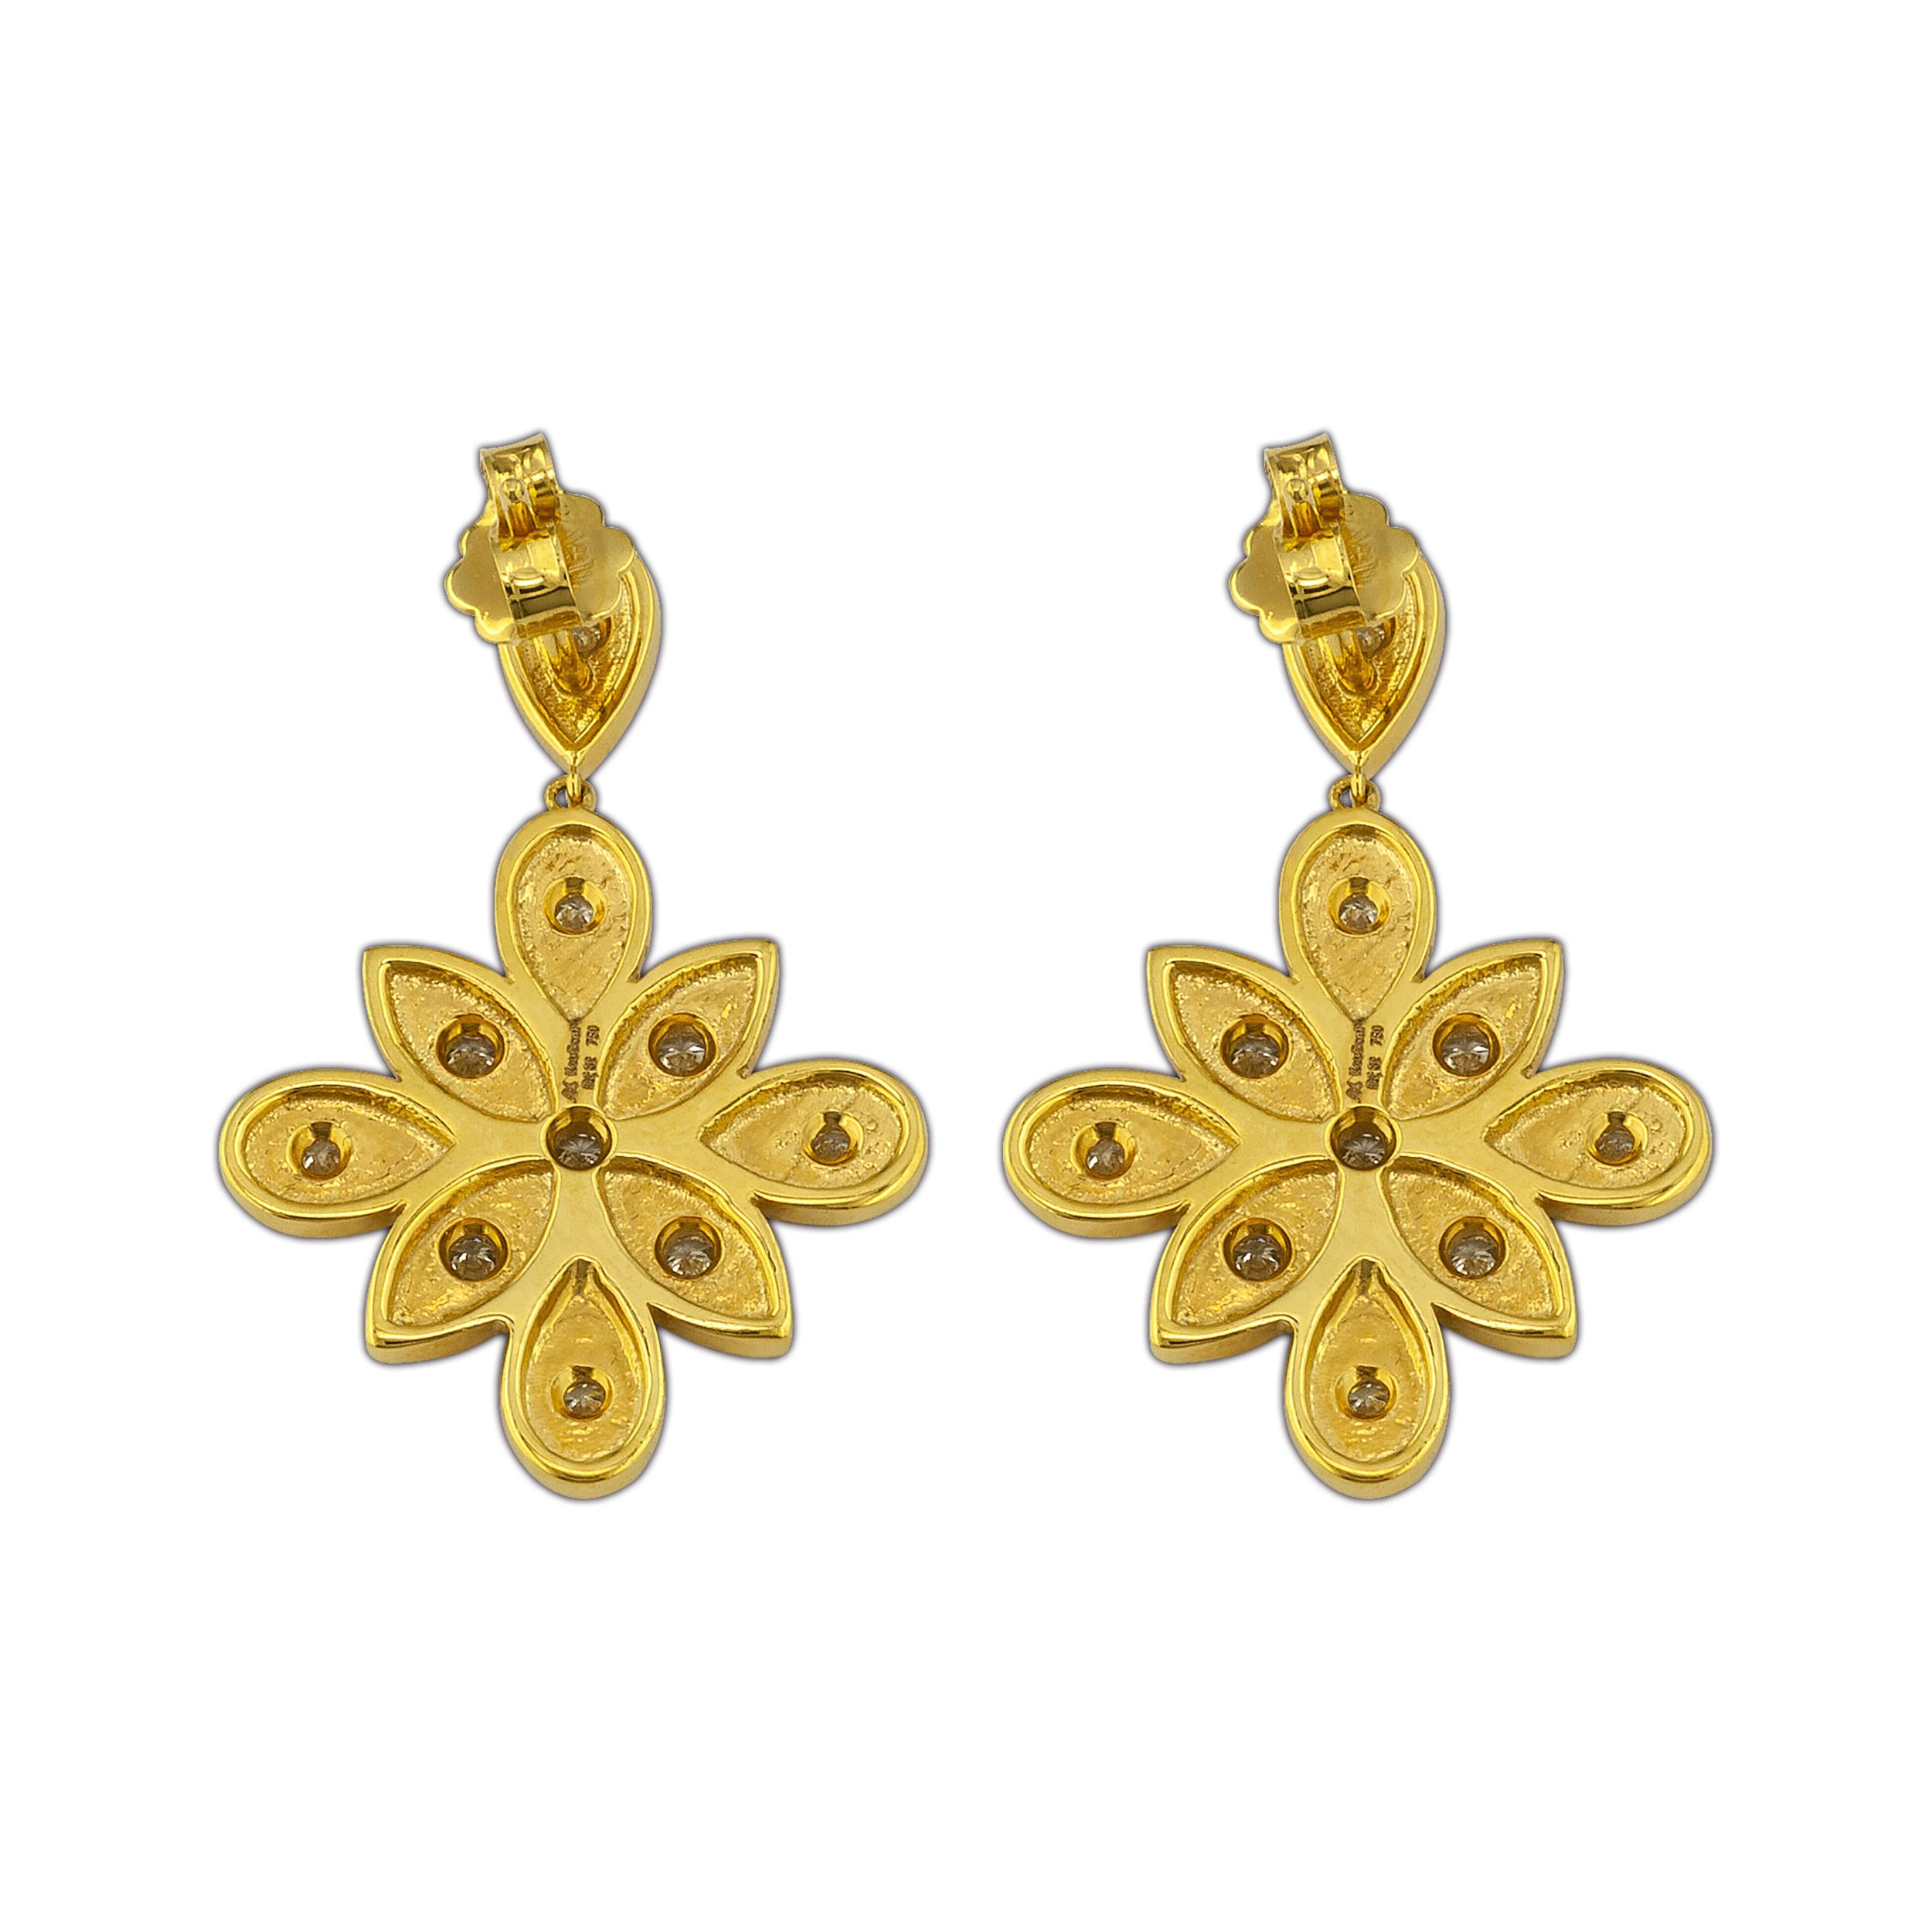 classical earrings made from k18 gold and diamonds